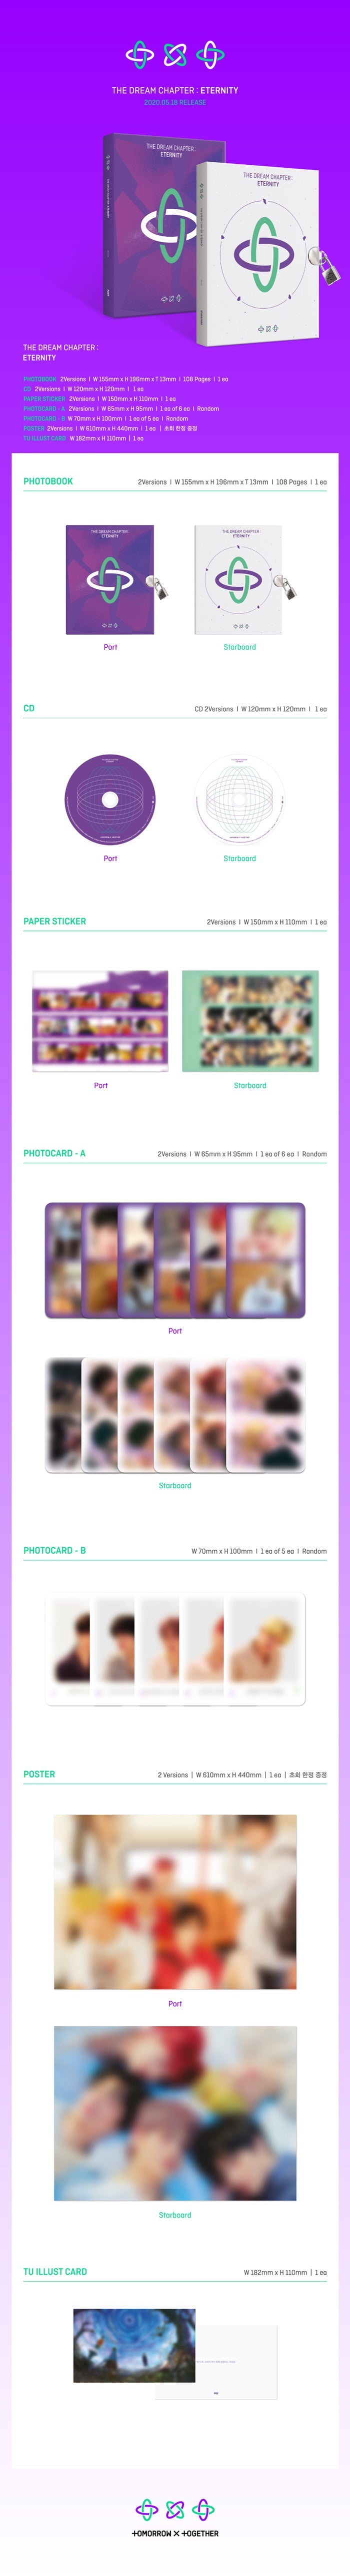 1 CD
1 Photo Book (108 pages)
1 Paper Sticker
1 Photo Card A (random out of 6 types)
1 Photo Card B (random out of 5 types...